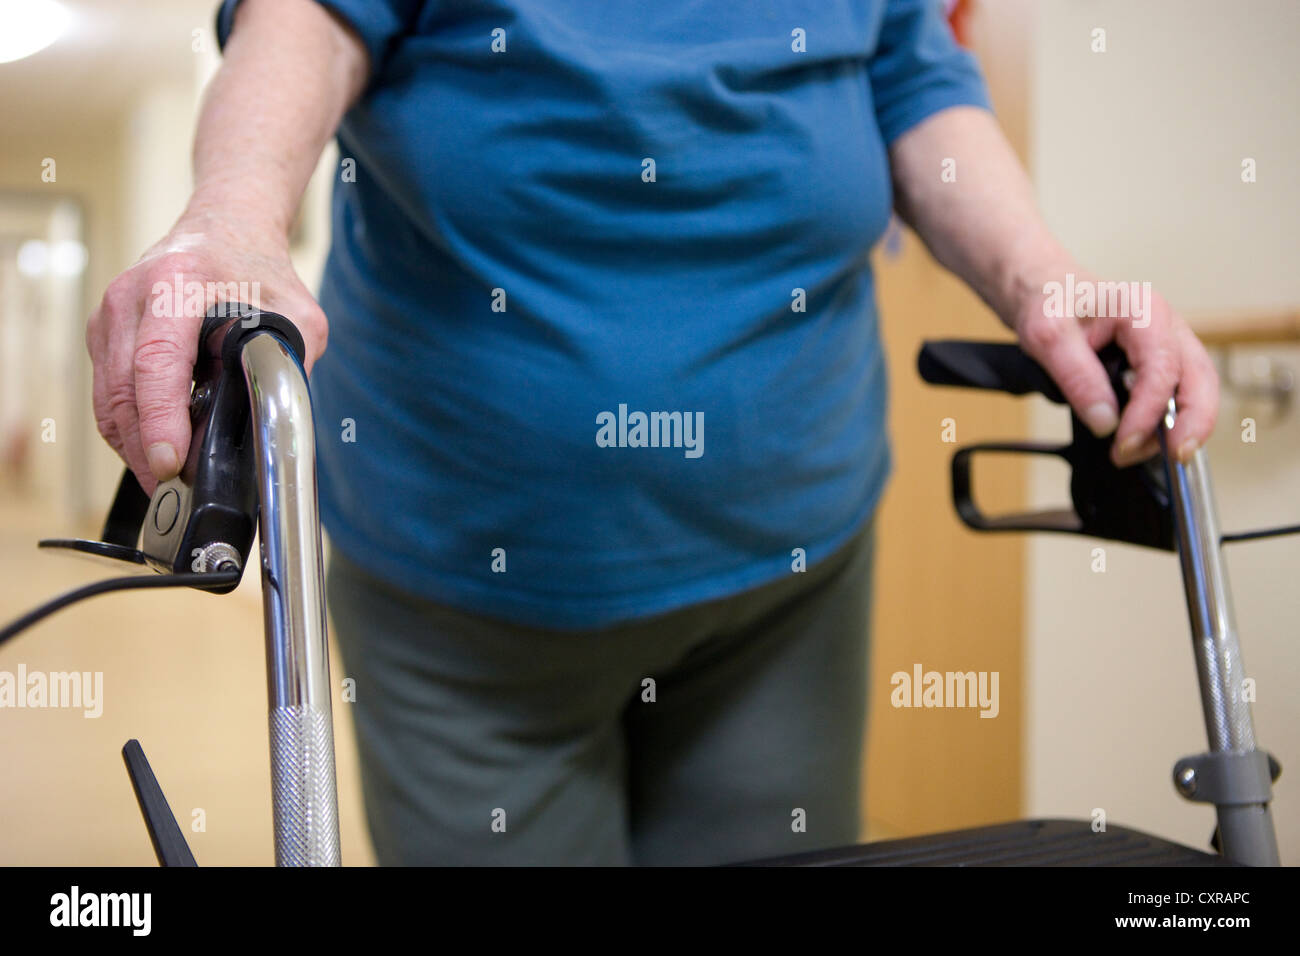 Elderly woman walking with a wheeled walker at a nursing home Stock Photo